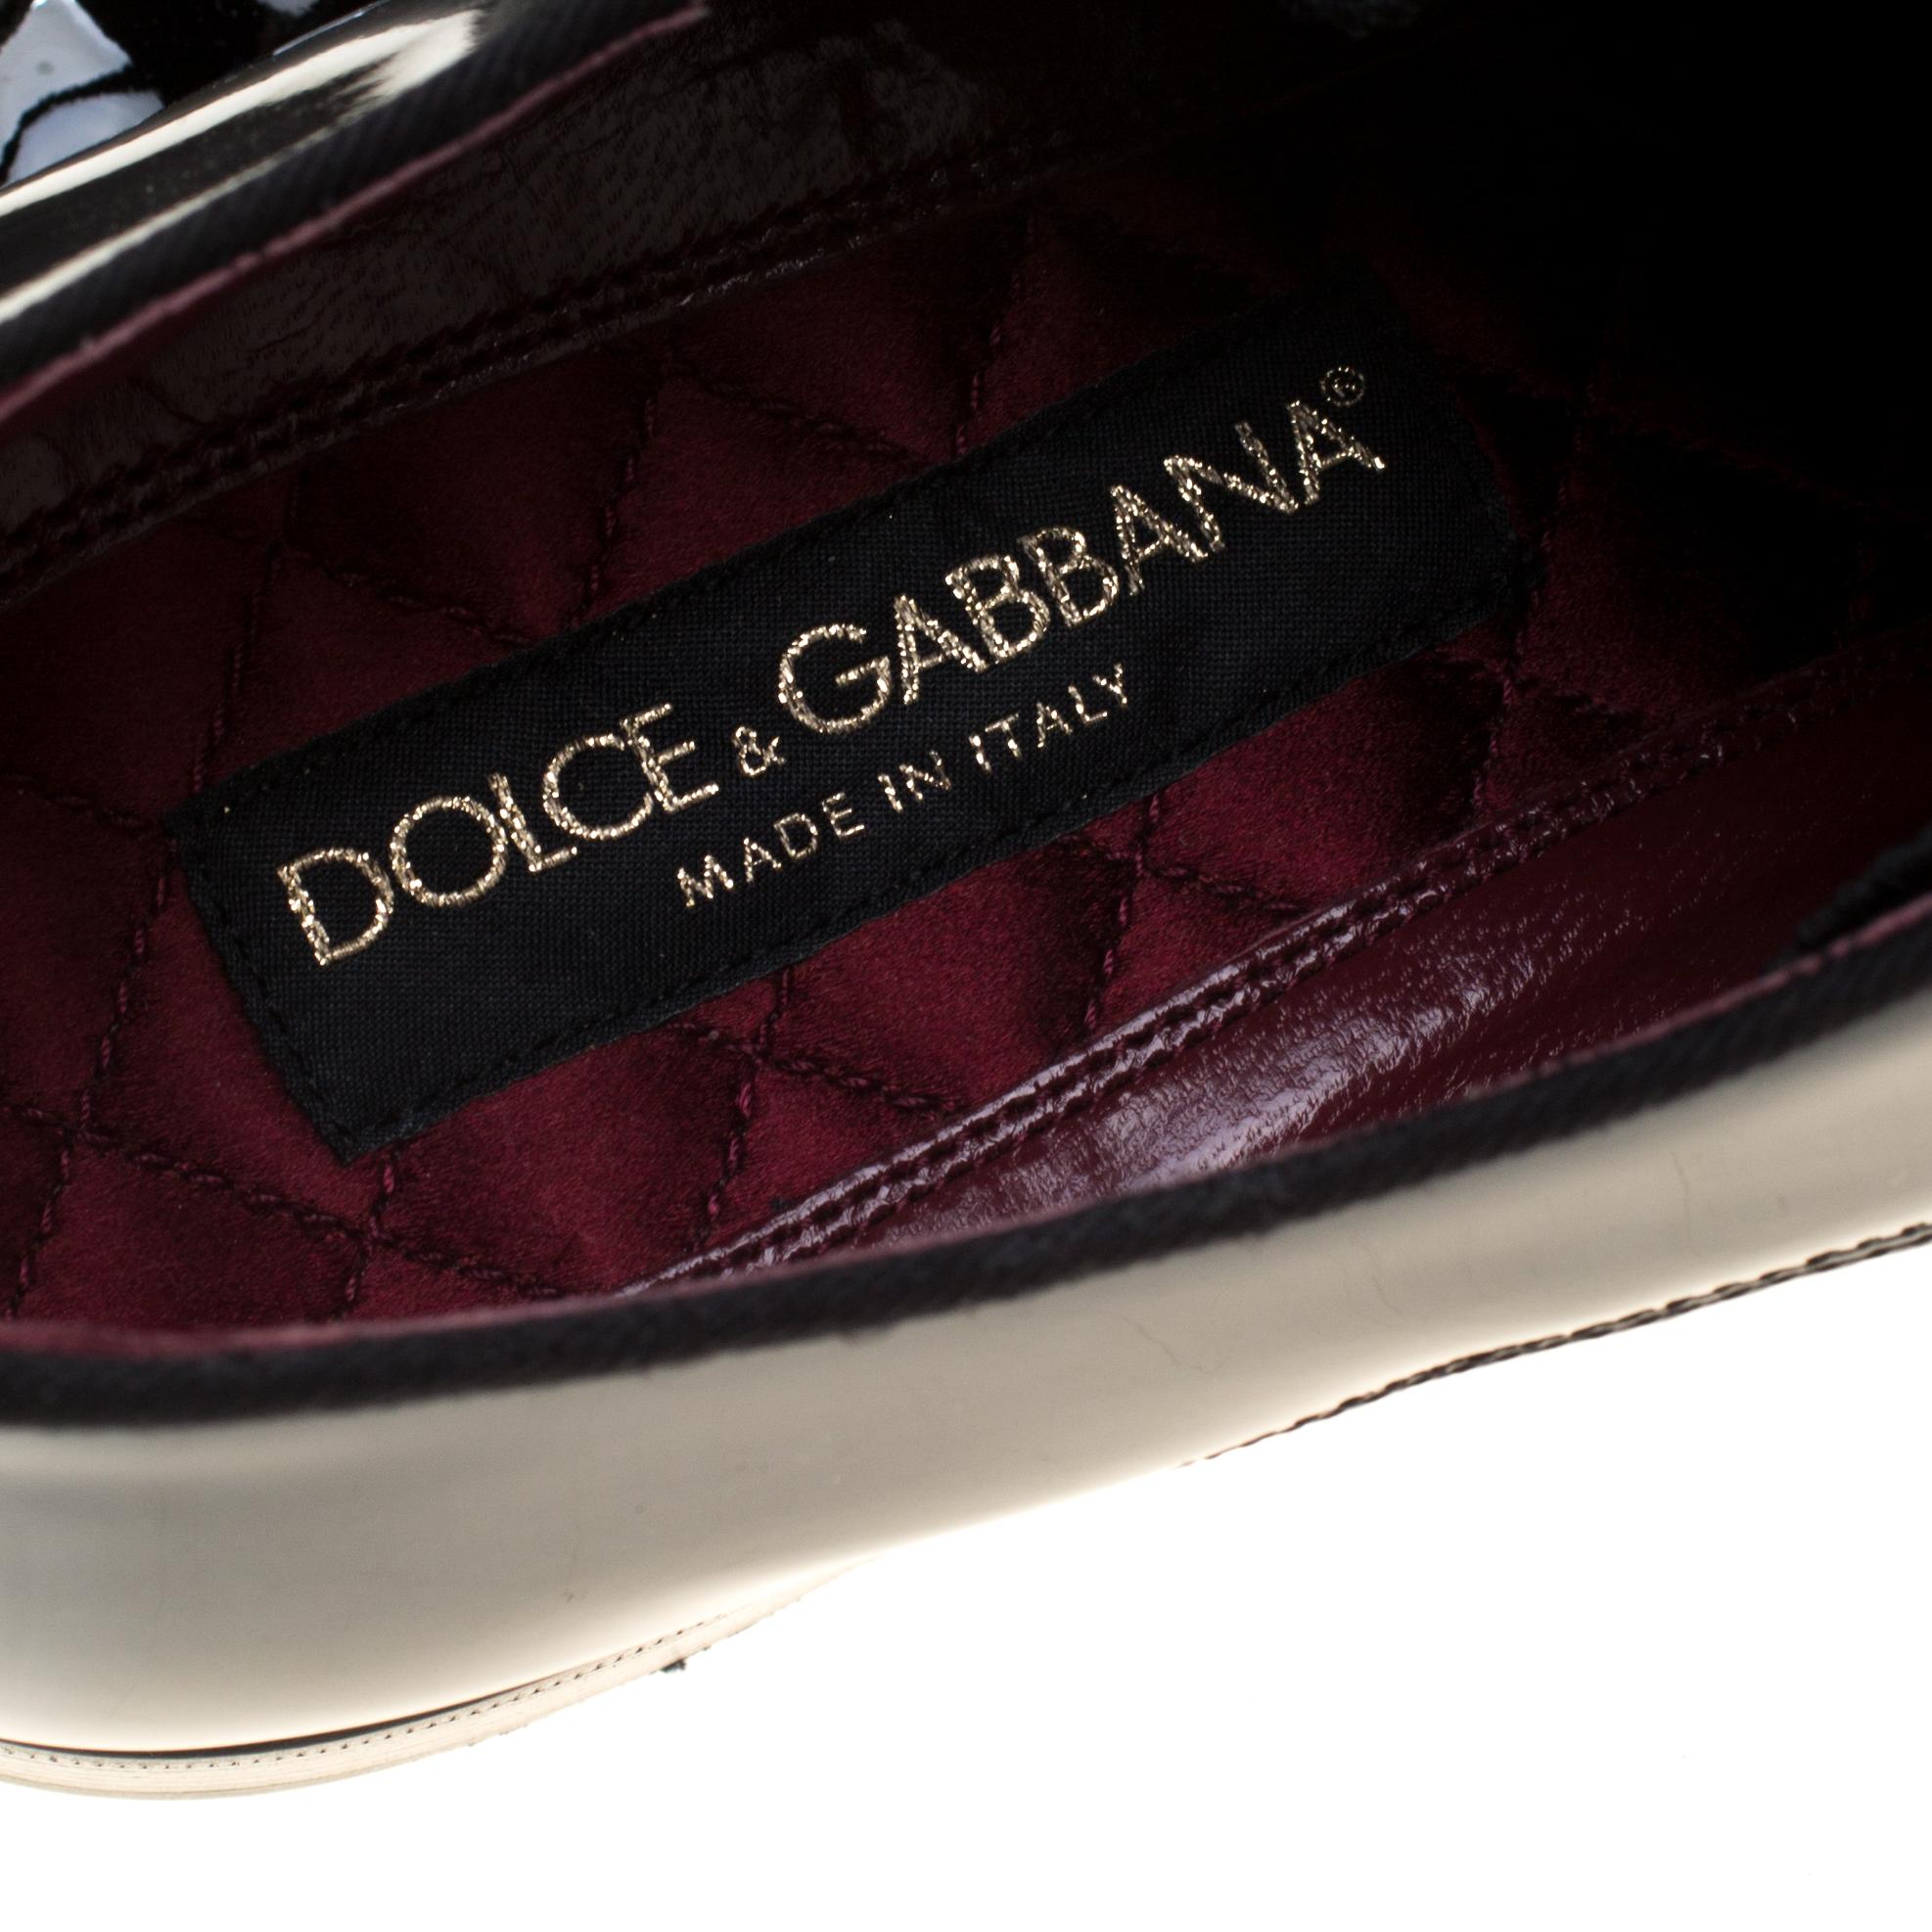 Dolce & Gabbana Black Patent Leather Derby Oxford Shoes Size 43 3